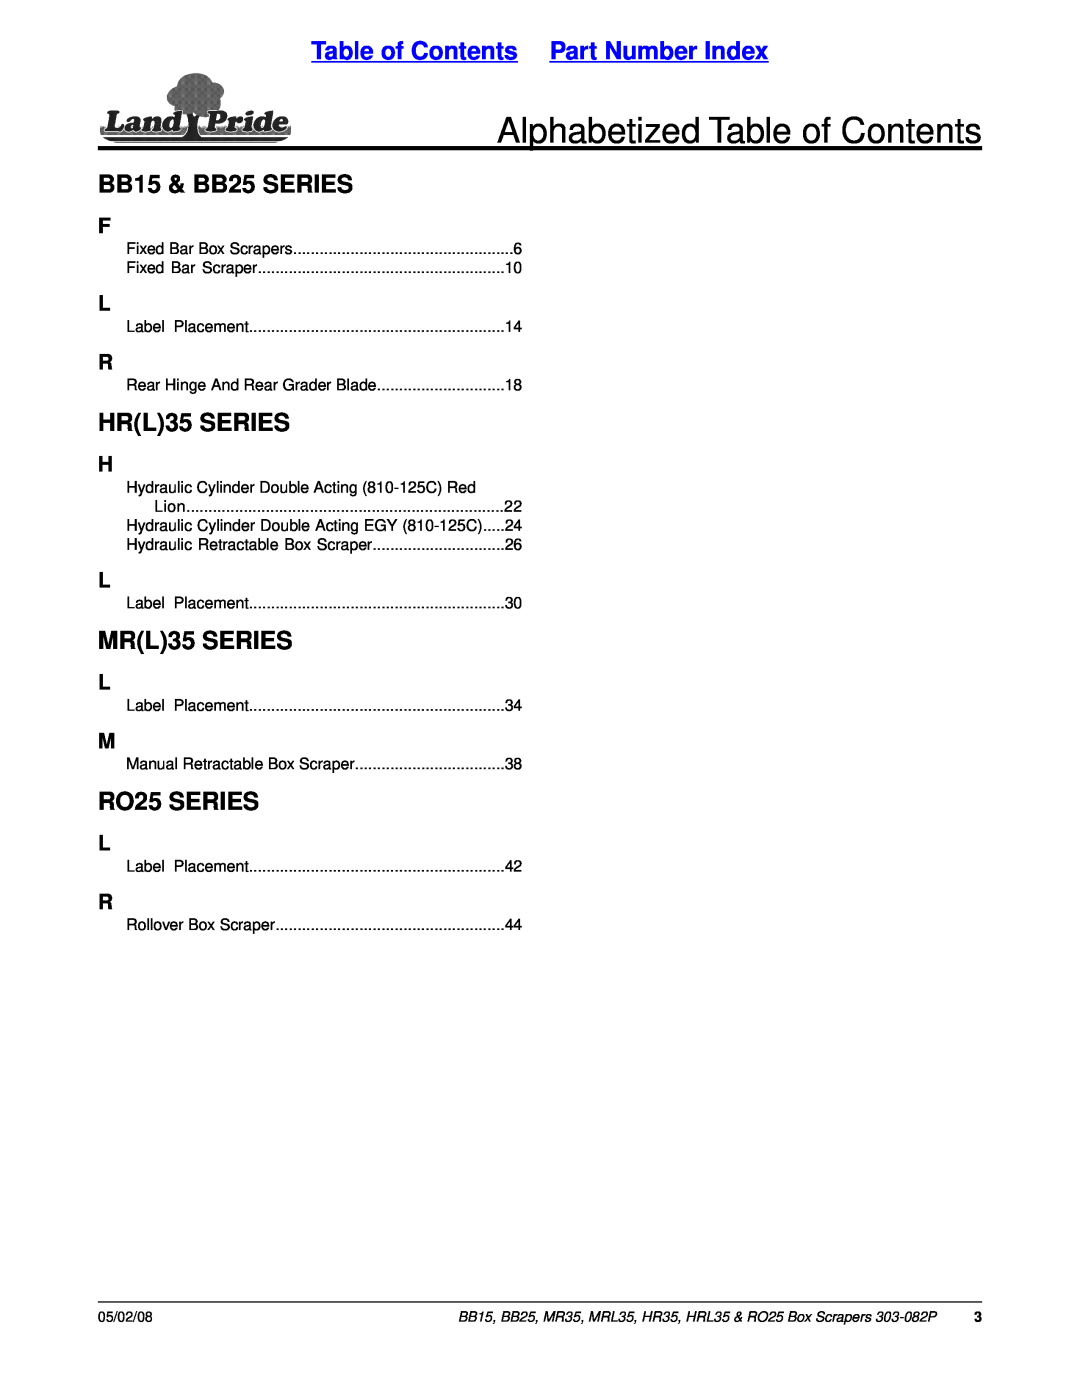 Land Pride HR35 Alphabetized Table of Contents, Table of Contents Part Number Index, BB15 & BB25 SERIES, HRL35 SERIES 